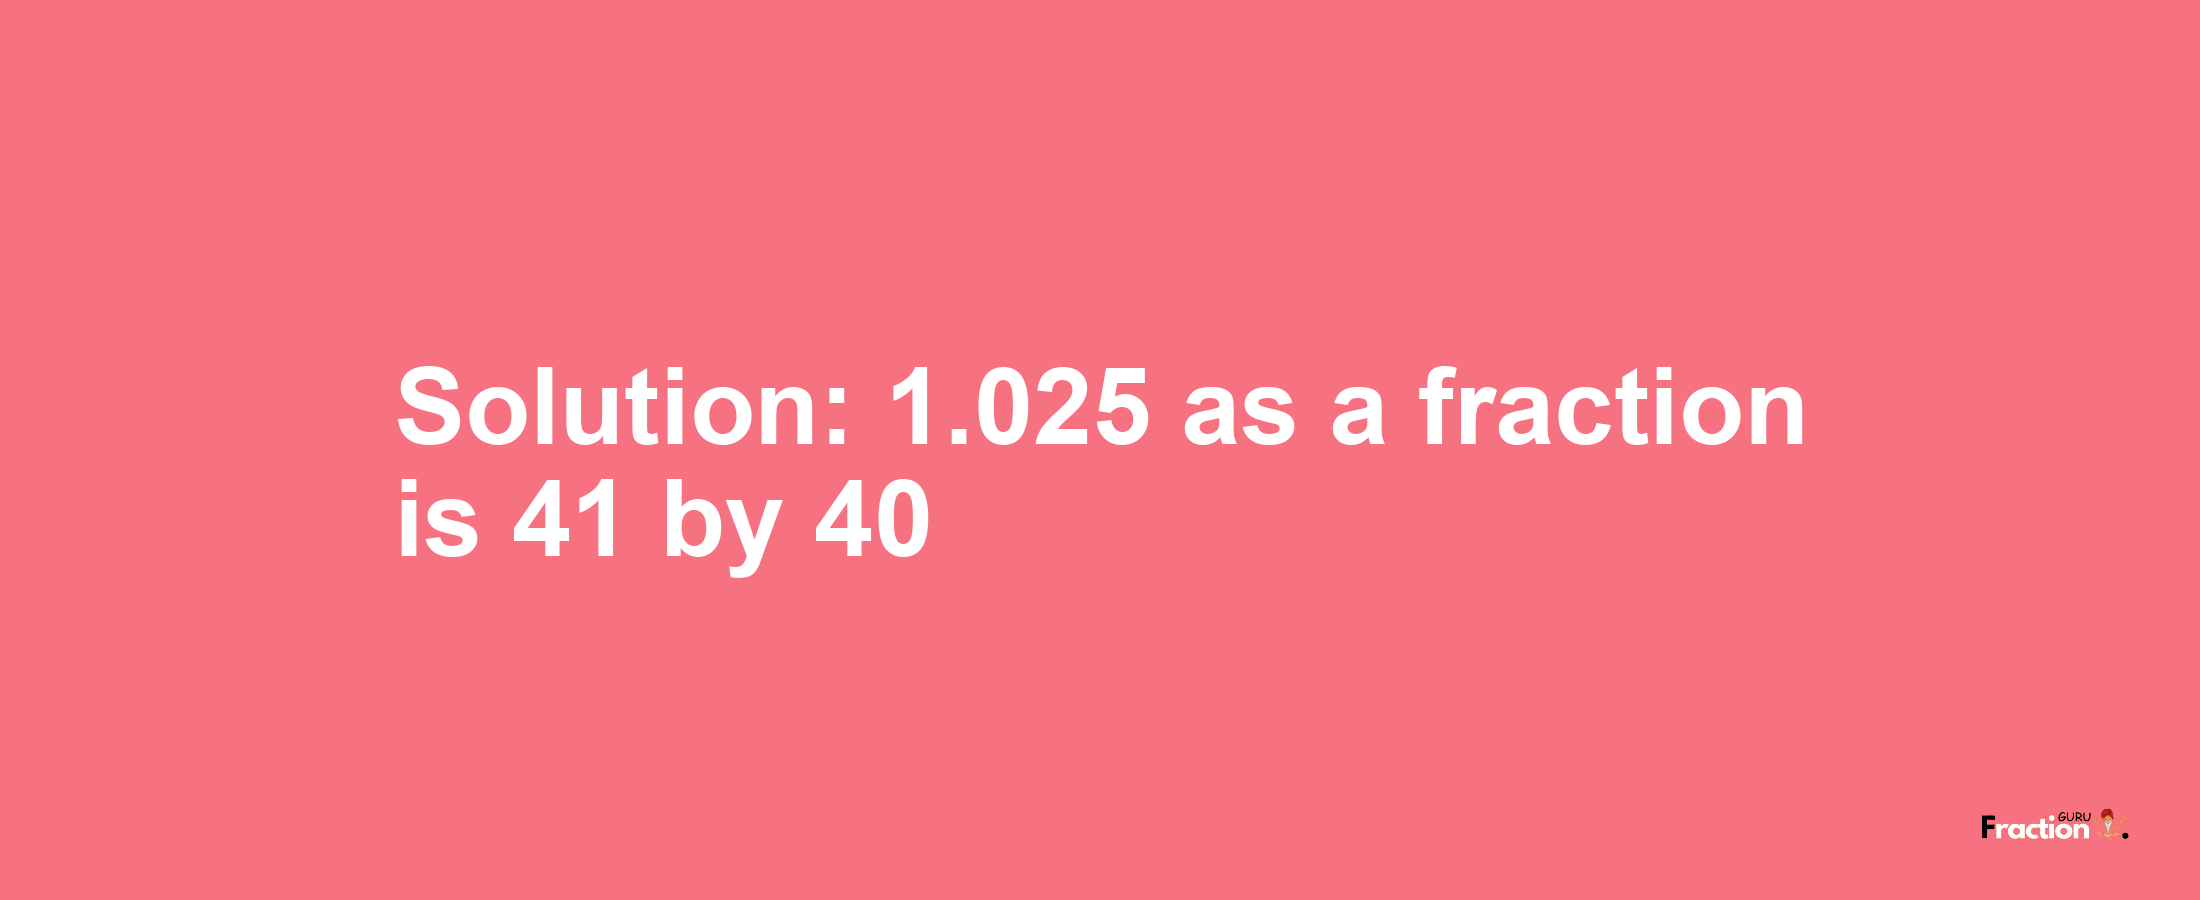 Solution:1.025 as a fraction is 41/40